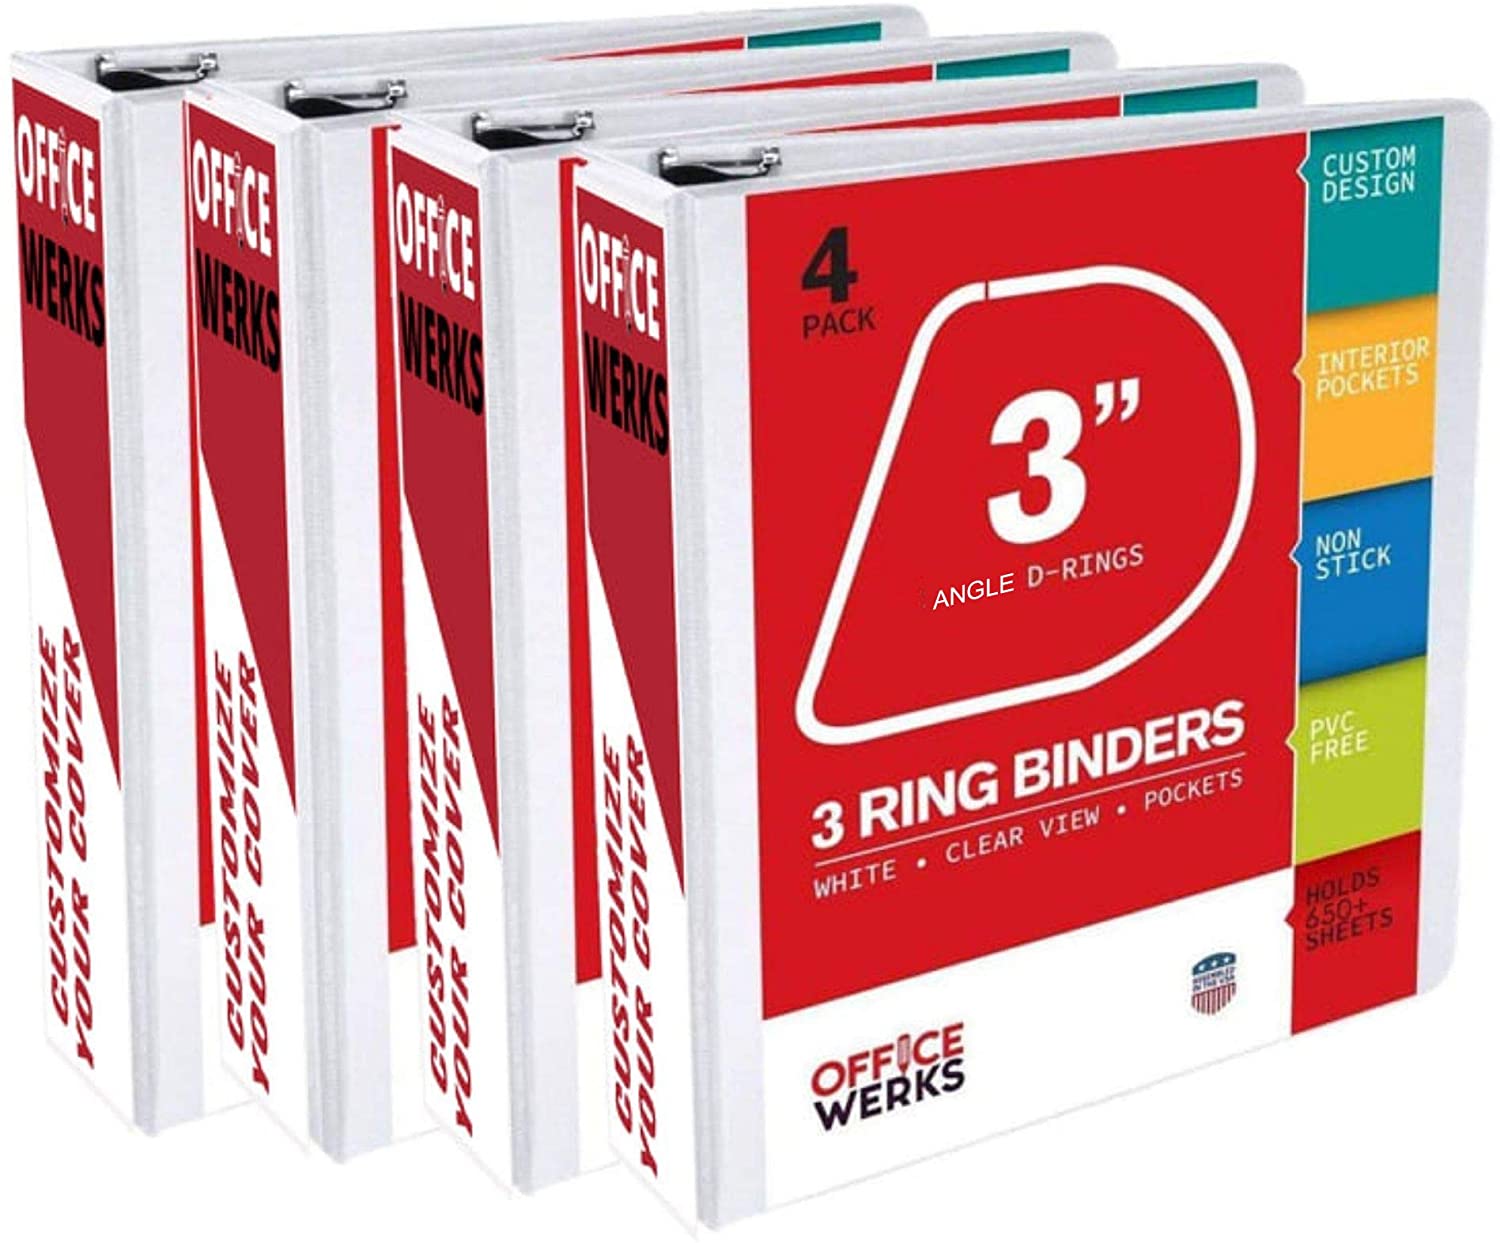 3 Ring Binder, 3 Inch Angle D-Rings, White, Clear View, Pockets, 4 Pack